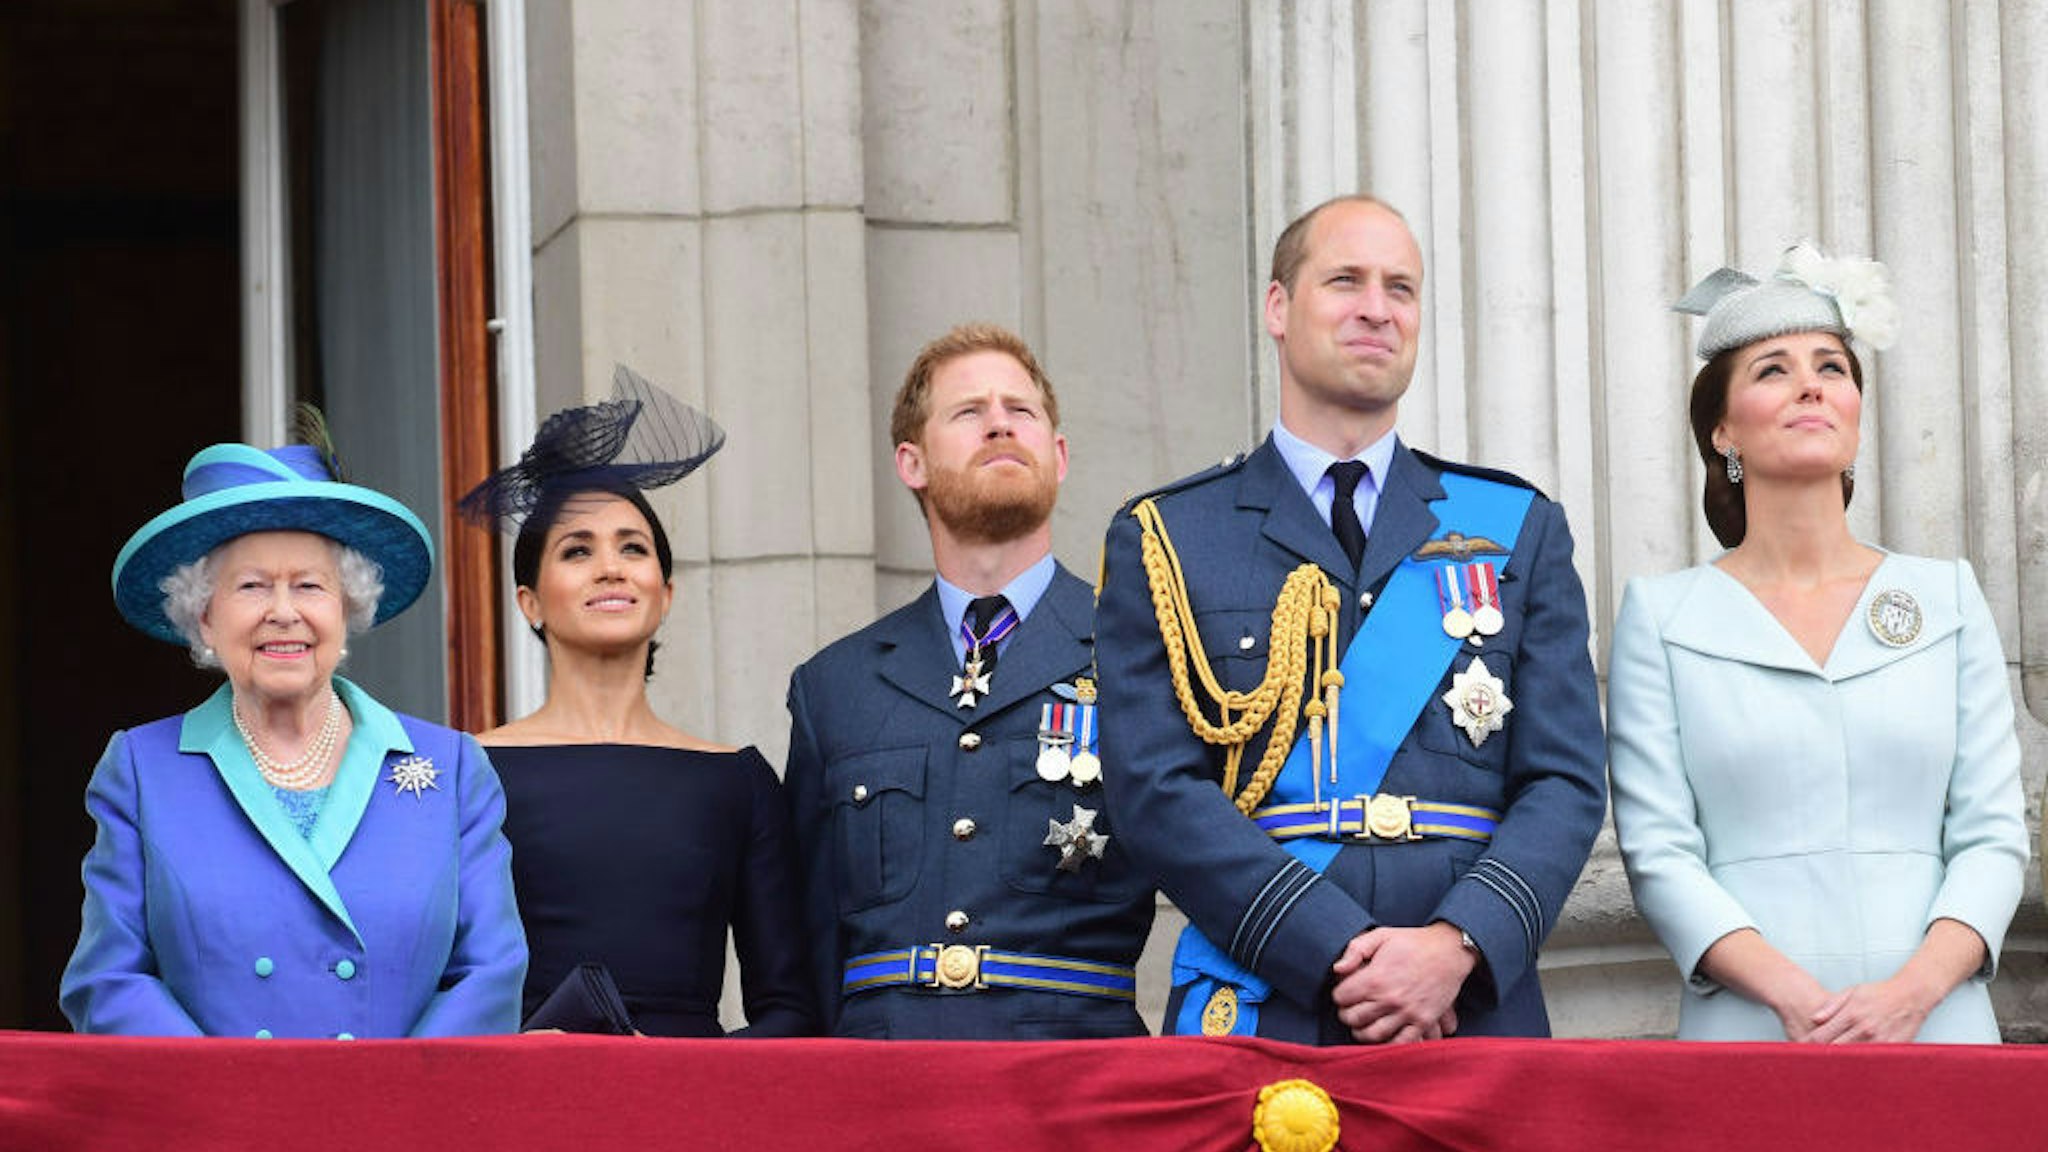 From left, Queen Elizabeth II, Meghan Duchess of Sussex, Prince Harry Duke of Sussex, Prince William Duke of Cambridge and Katherine Duchess of Cambridge watch the RAF 100th anniversary flypast from the balcony of Buckingham Palace, London, Tuesday 10th July, 2018. Photo: Paul Grover for the Telegraph